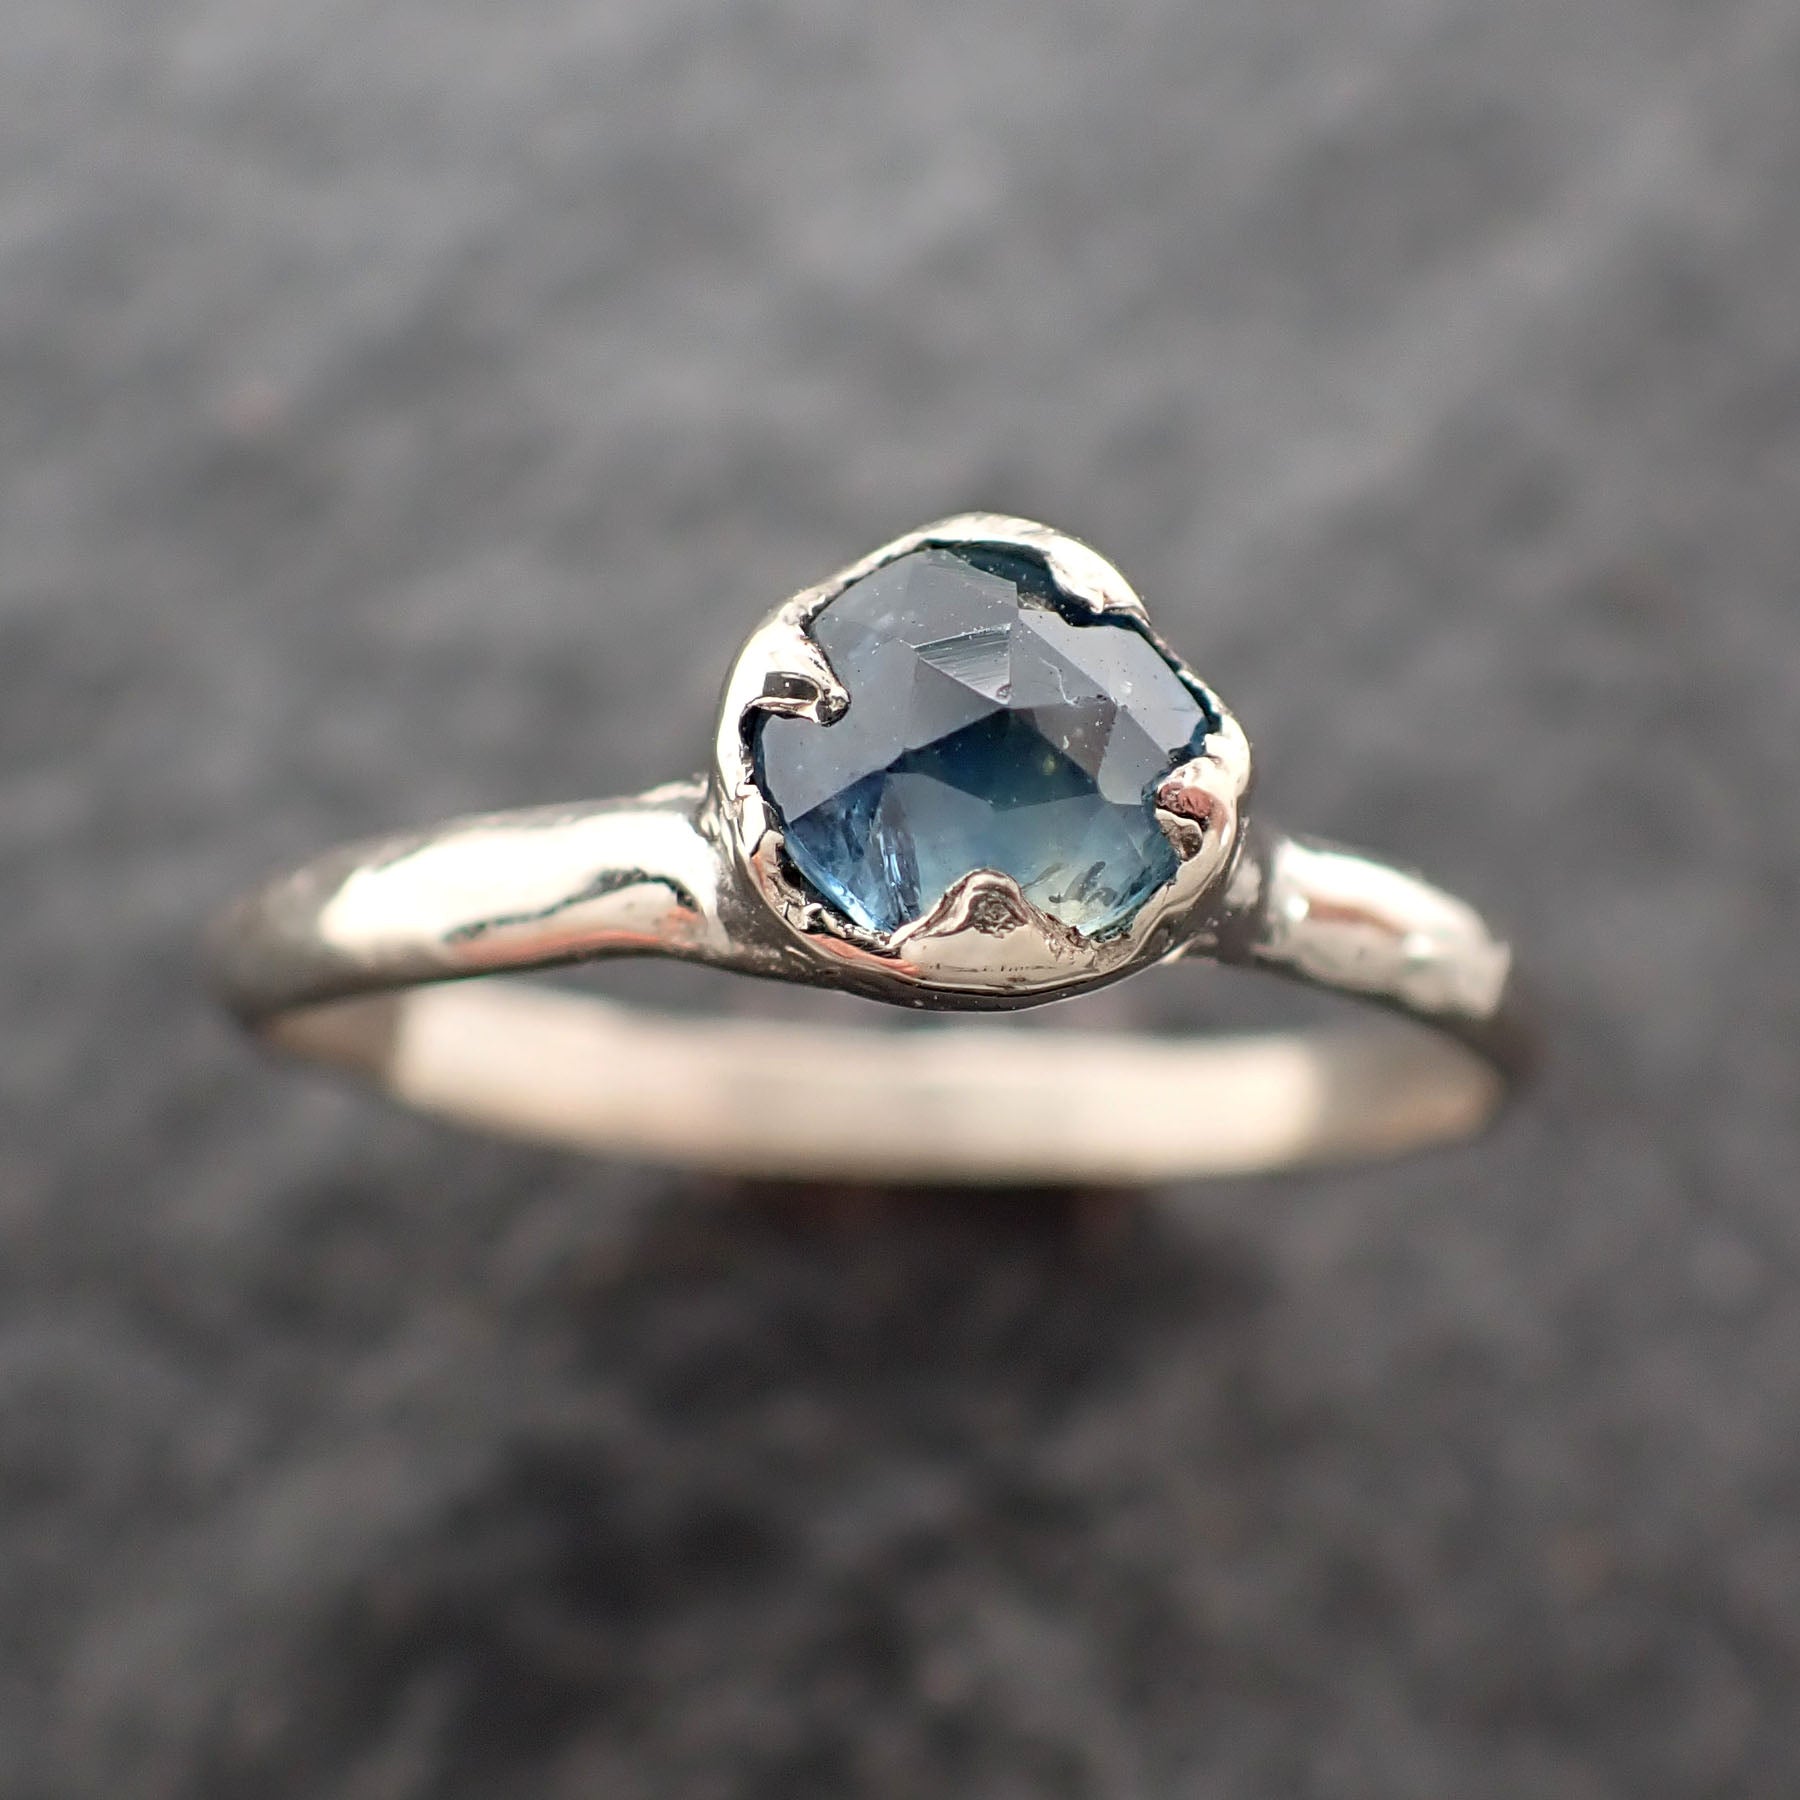 Fancy cut Montana blue green Sapphire 14k White gold Solitaire Ring Gold Gemstone Engagement Ring 2625